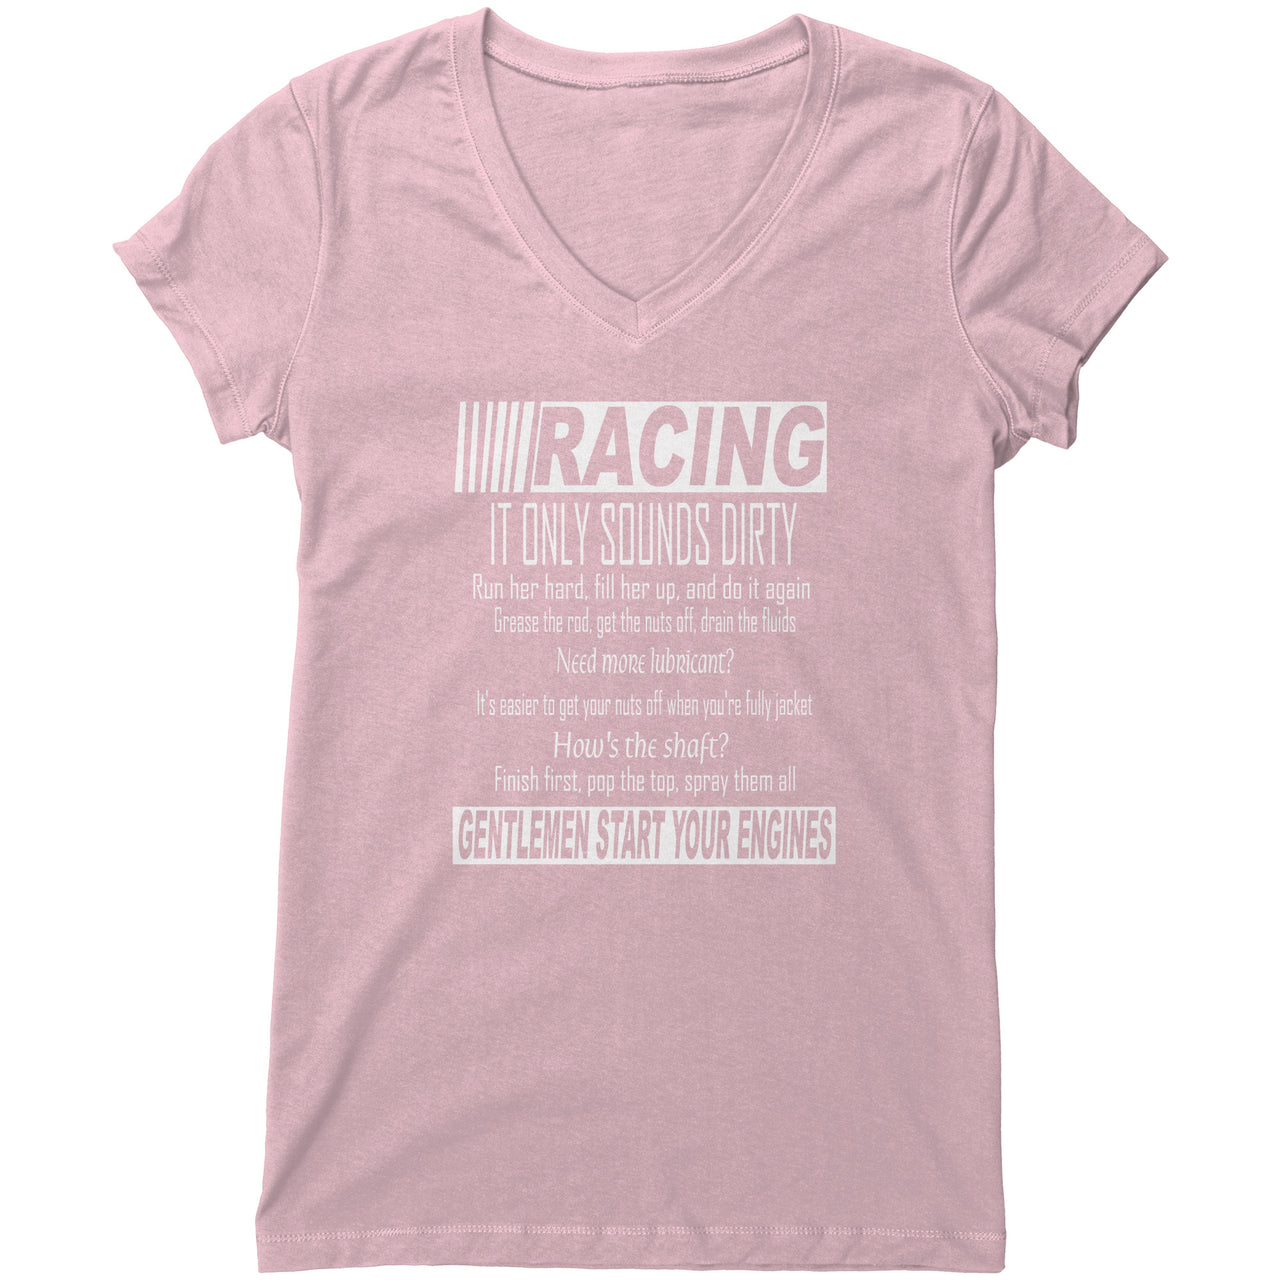 Racing It only sounds dirty Women's T-Shirts/Hoodies WV